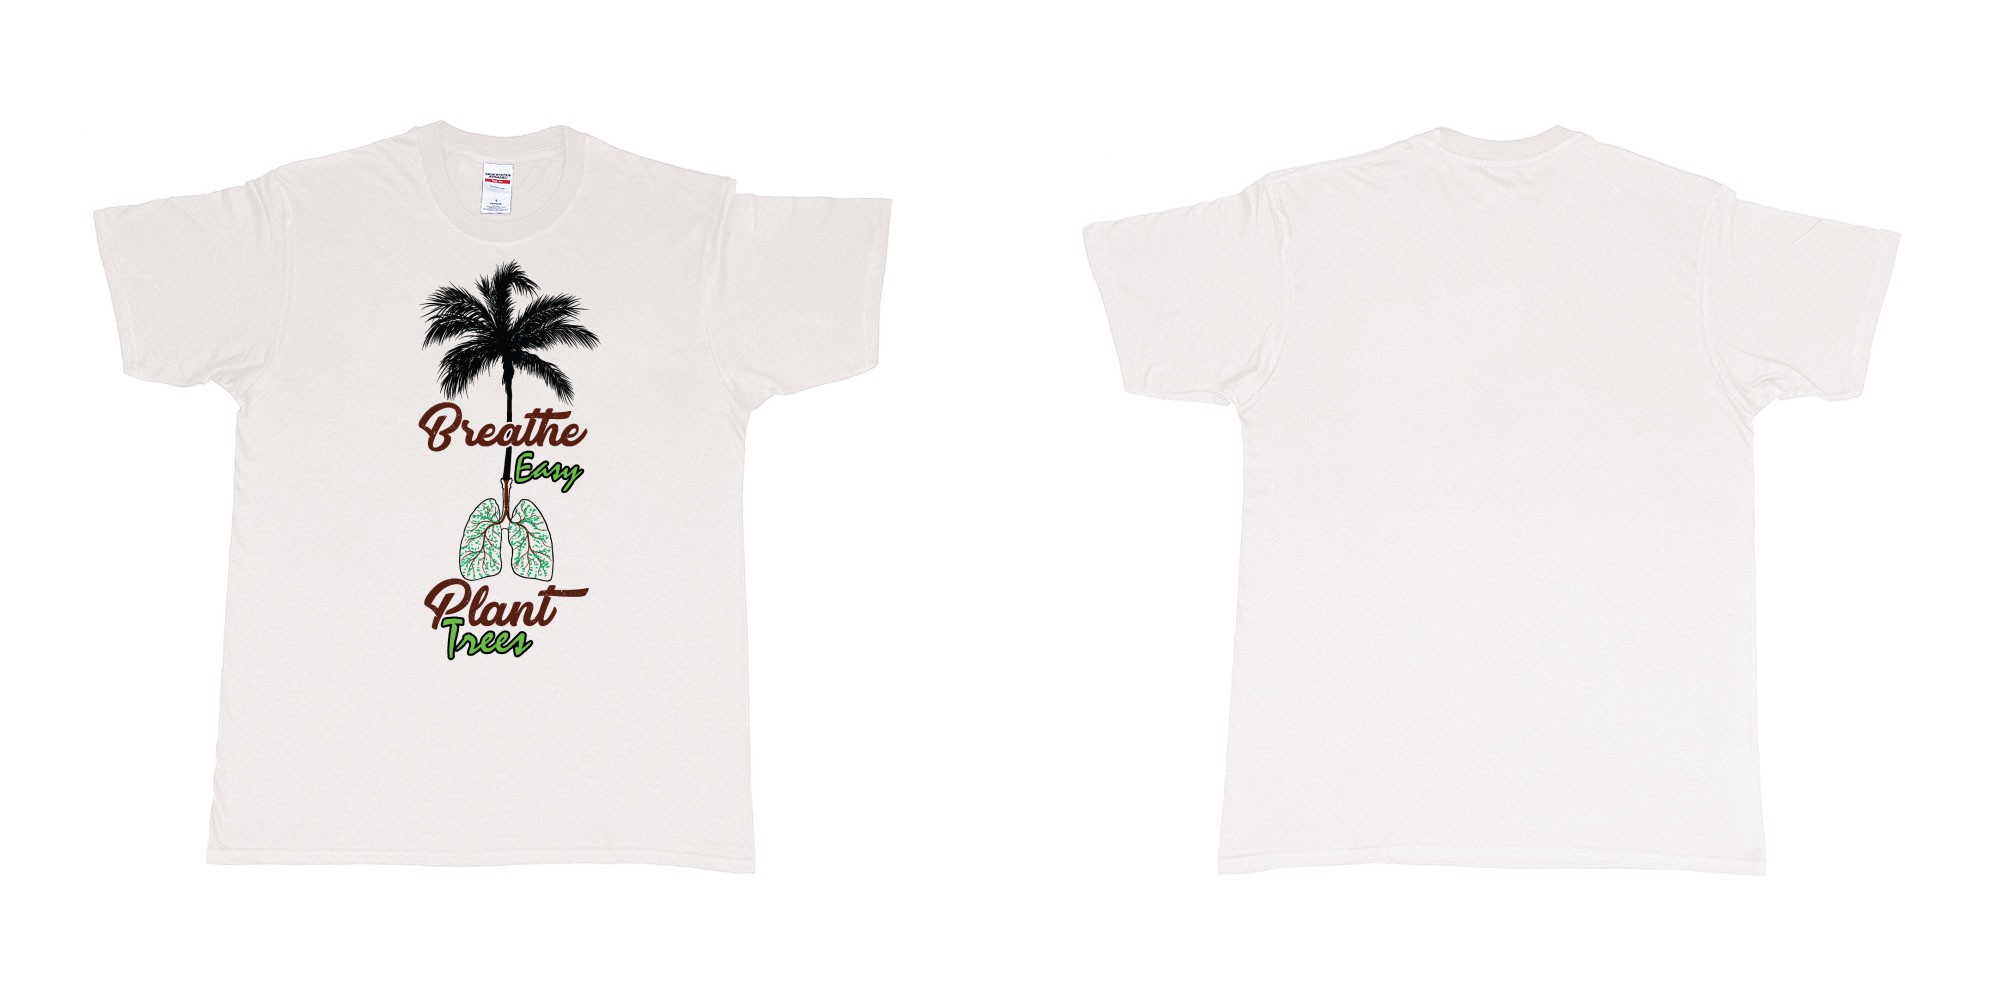 Custom tshirt design breathe easy and plant a tree for better air for everyone in fabric color white choice your own text made in Bali by The Pirate Way